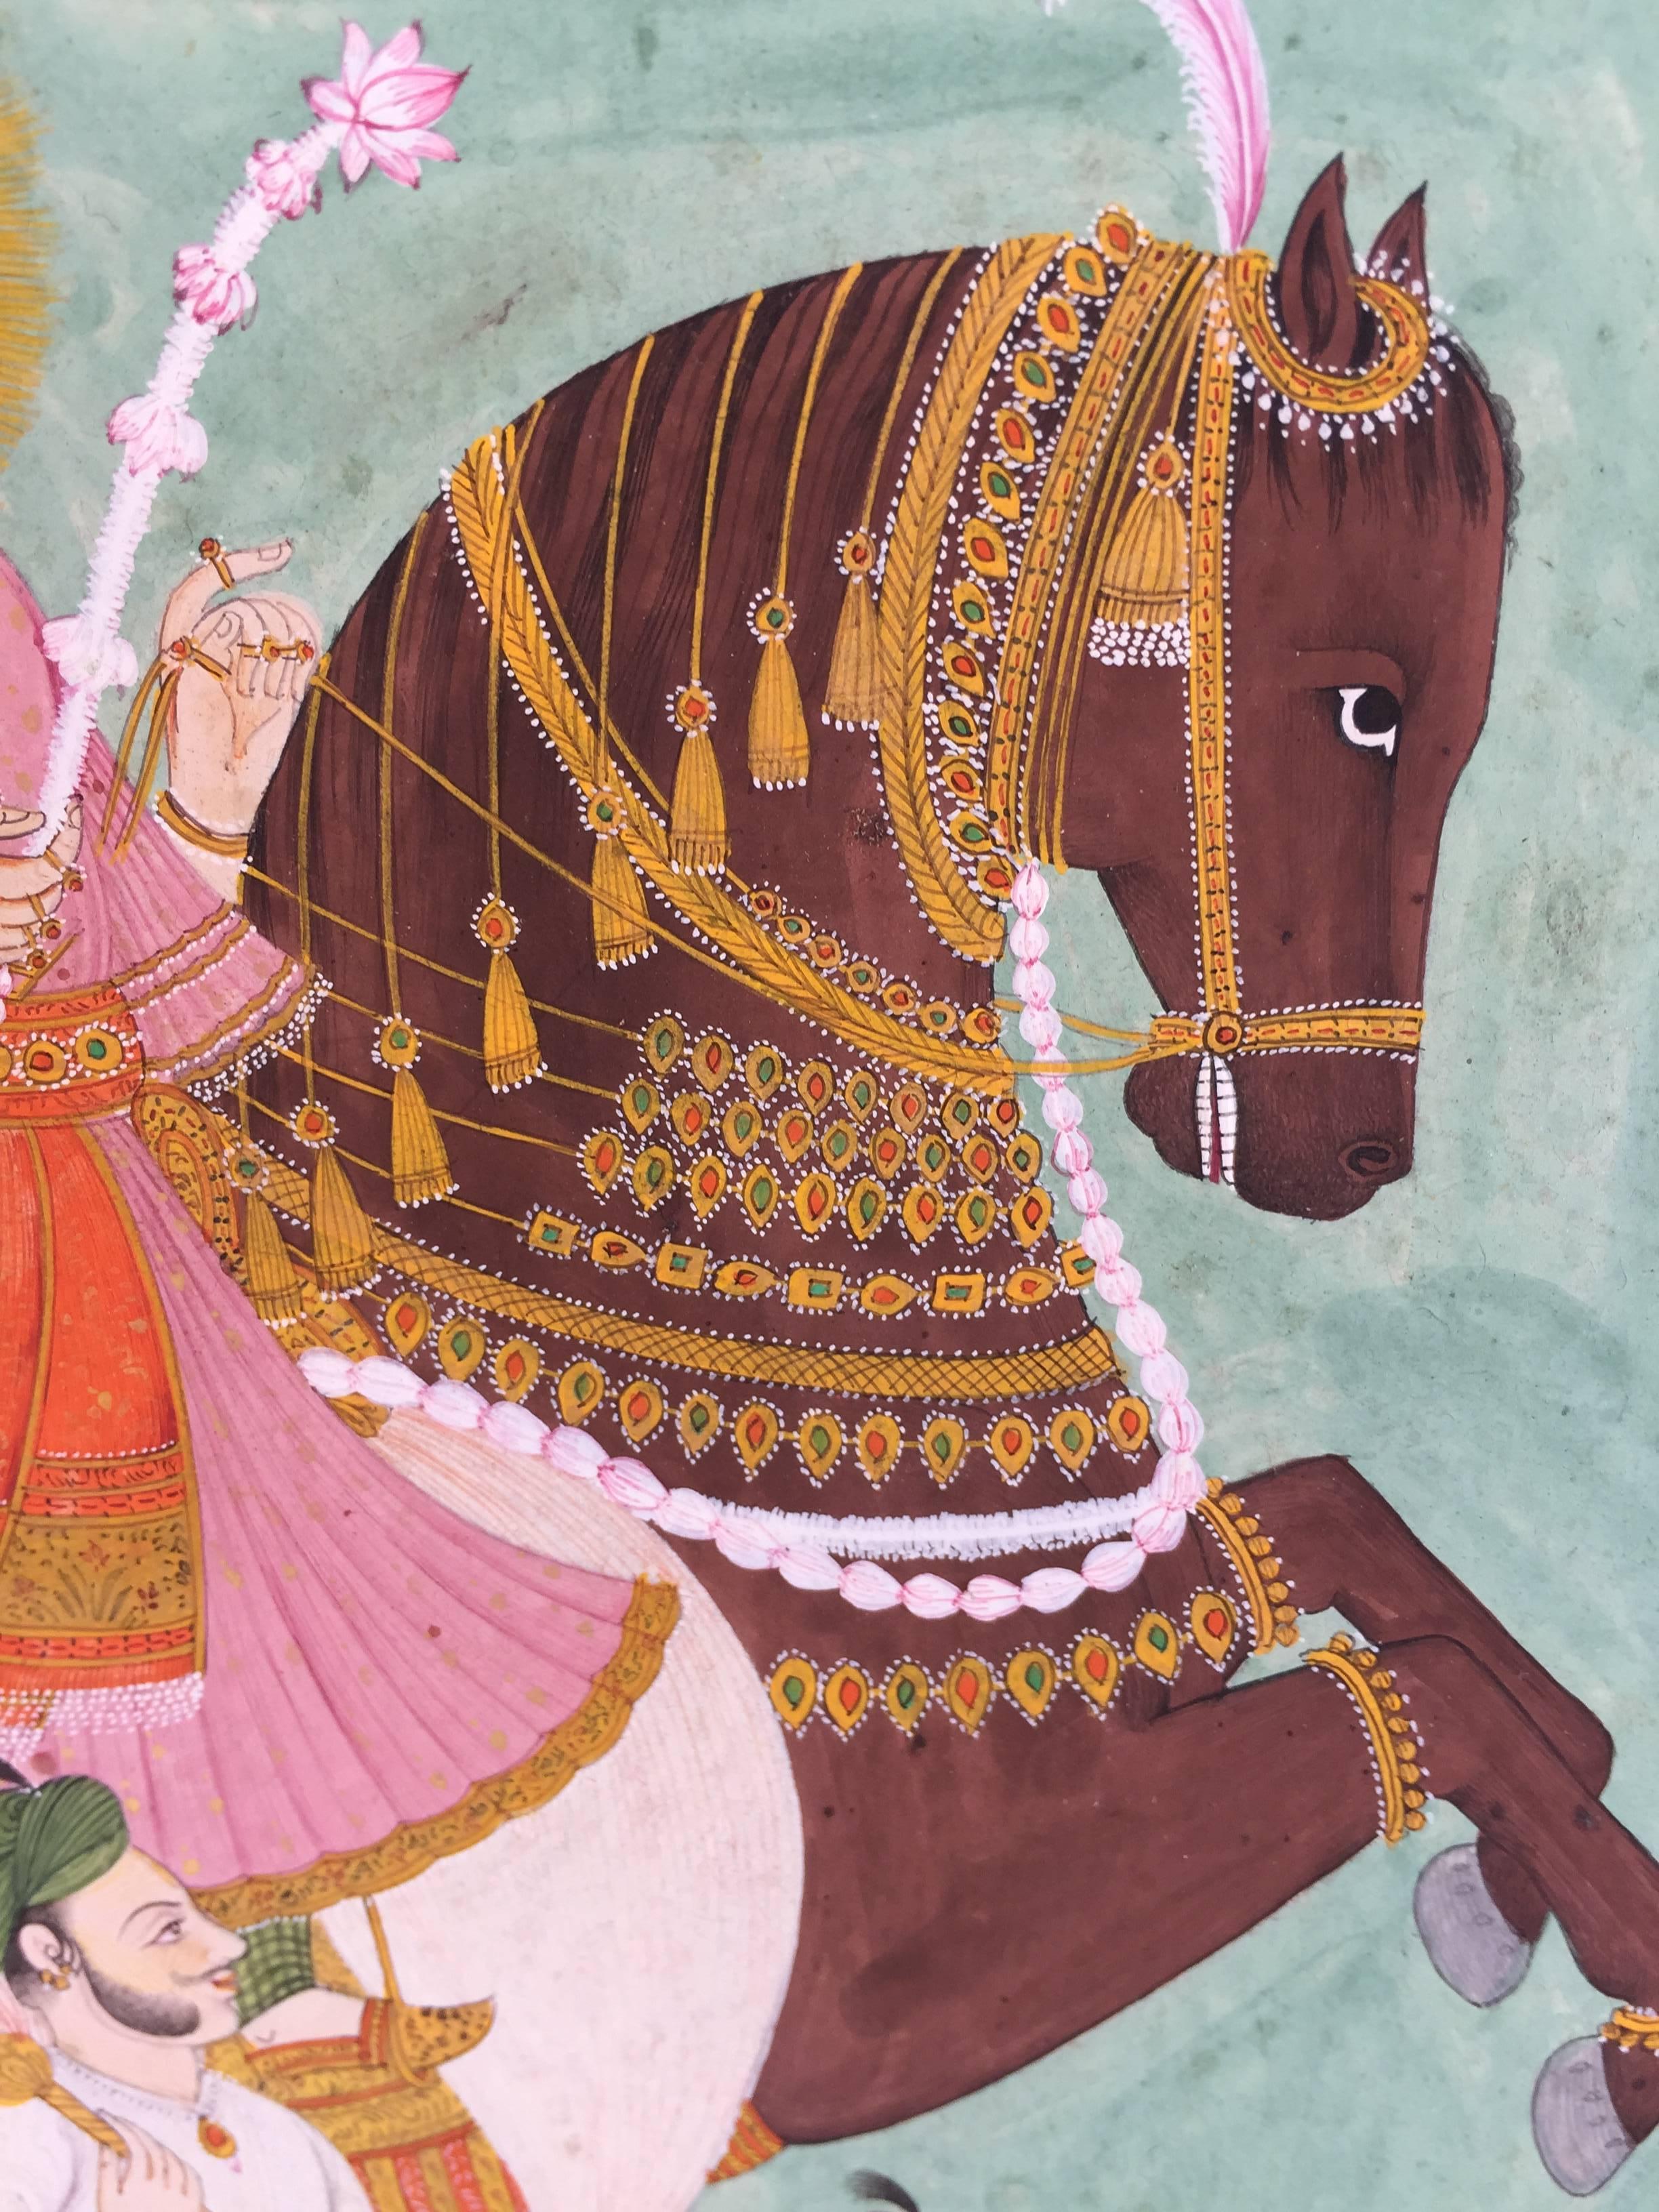 mewar style of painting